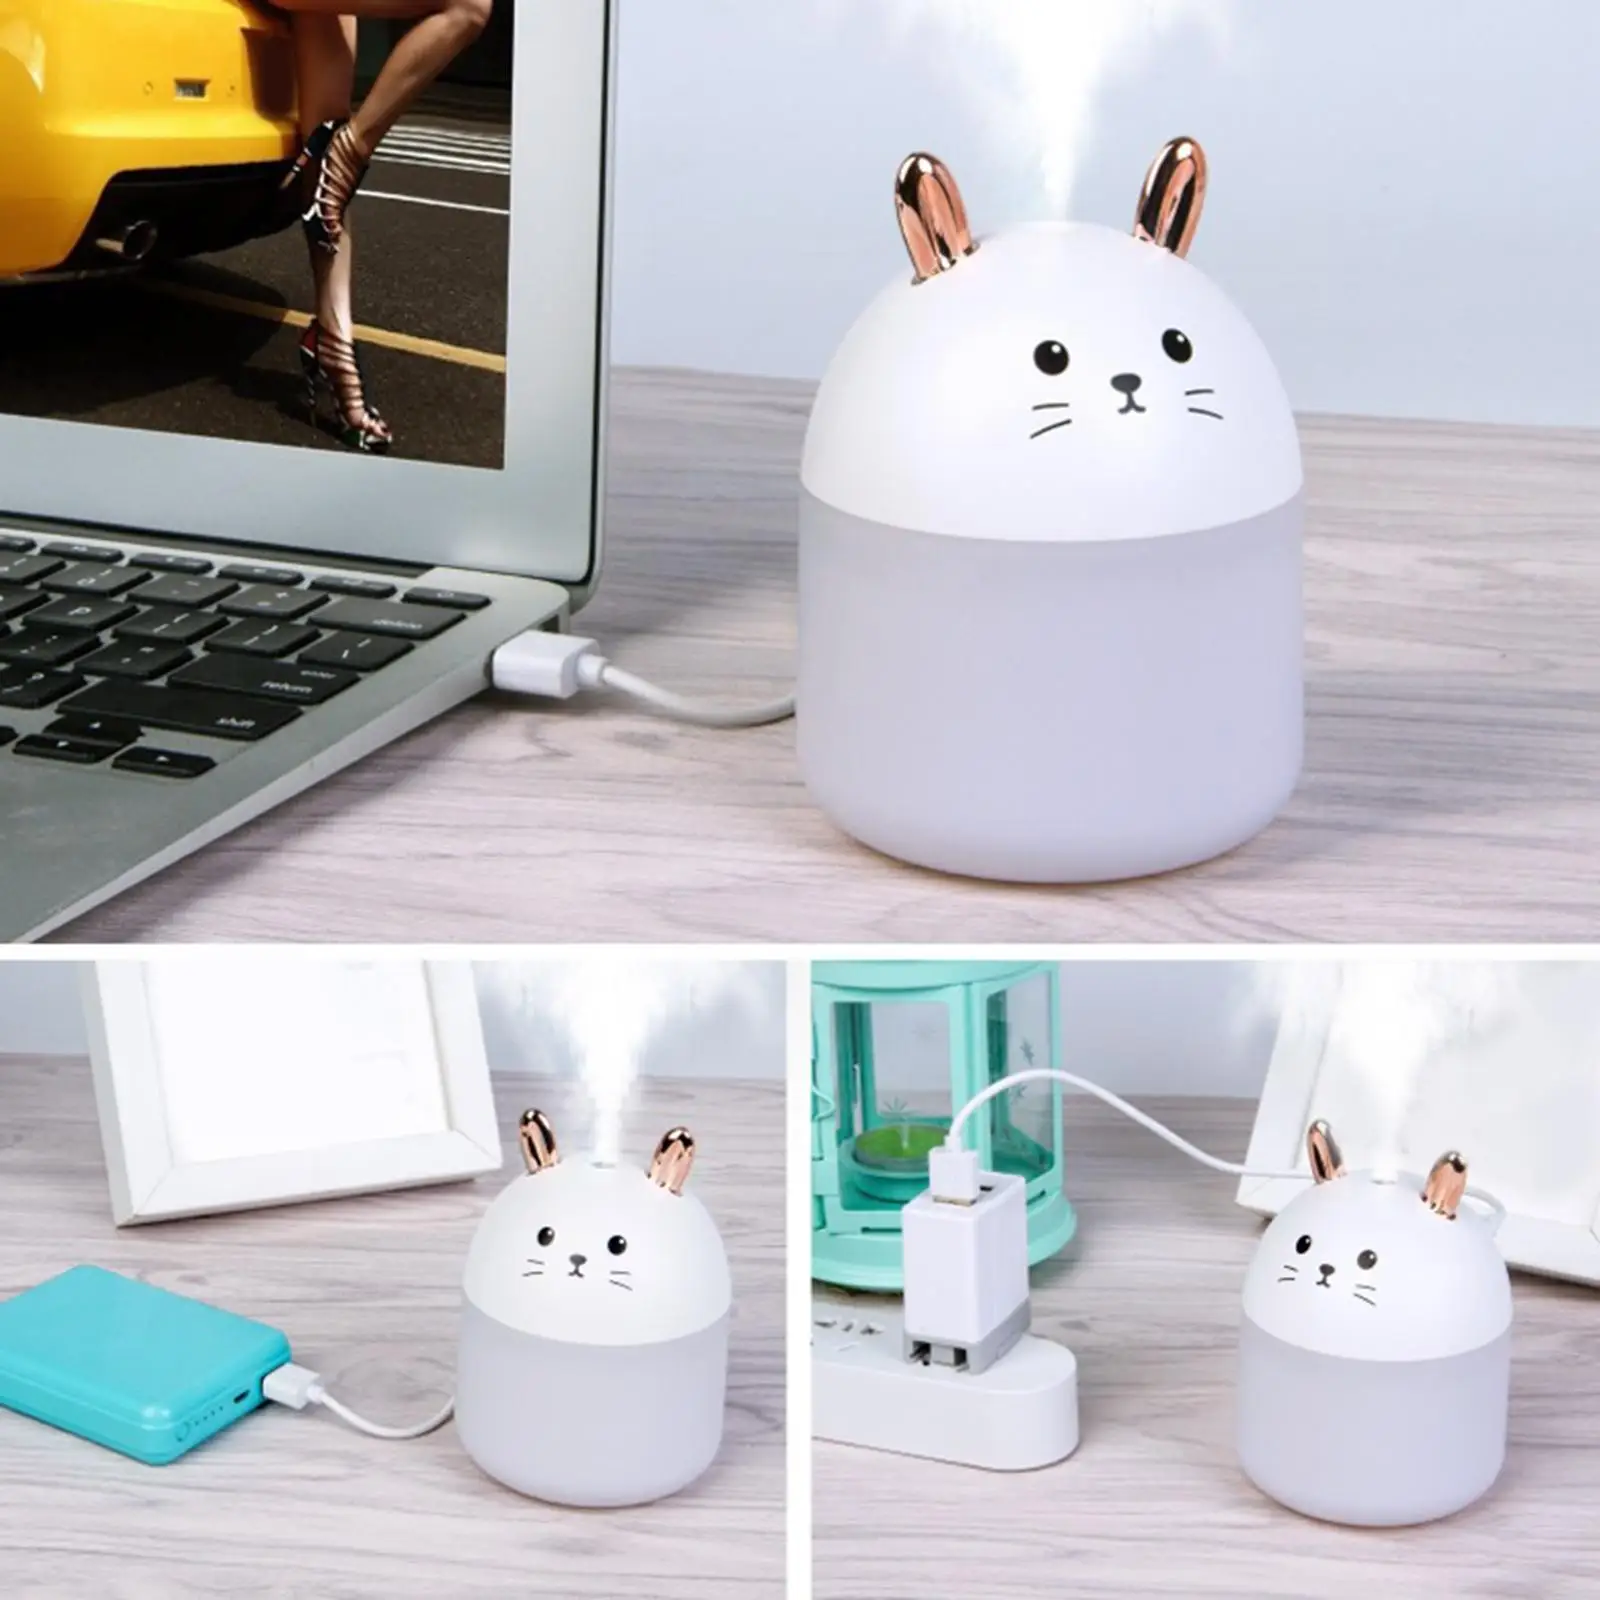 250ml Mall Air Humidifier Water Tank USB Essential Oil Aroma Diffuser Ultrasonic Fog Steam for Household Desktop Living Room 